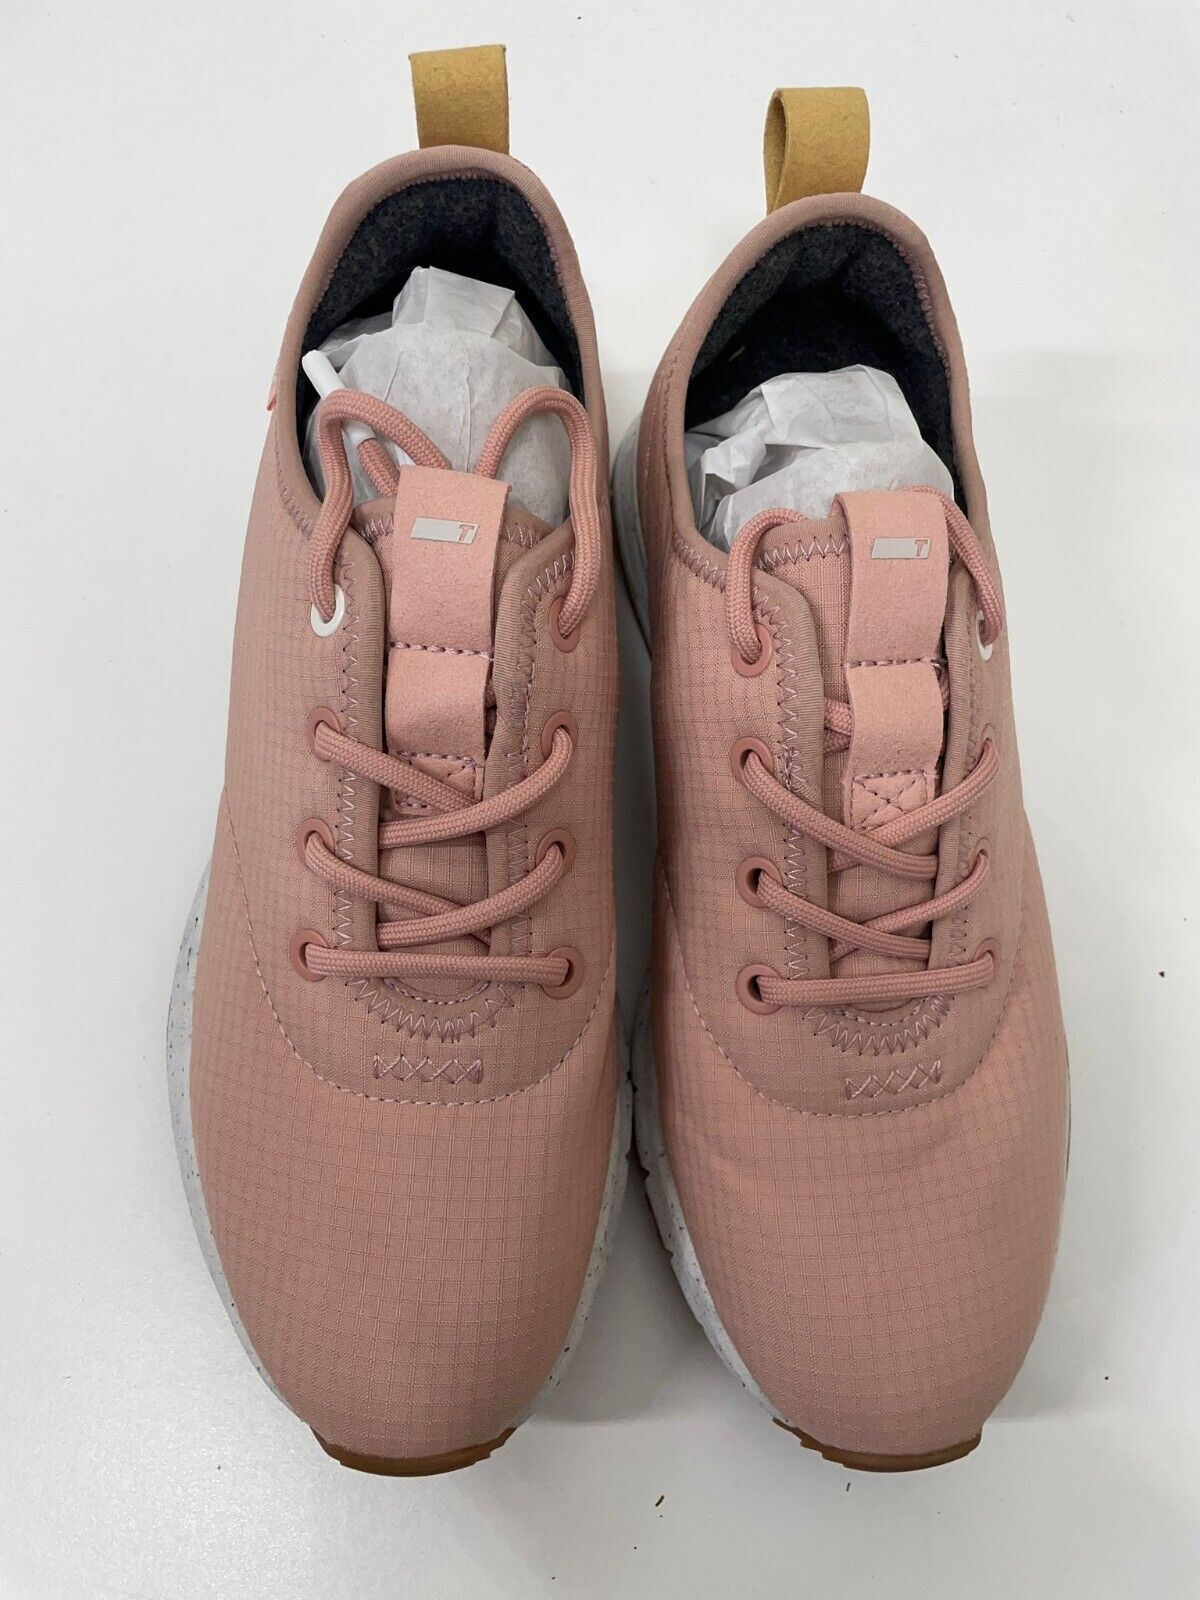 True Links Wear Womens 7.5 TKIII All Day Ripstop Golf Shoes Rose Pink